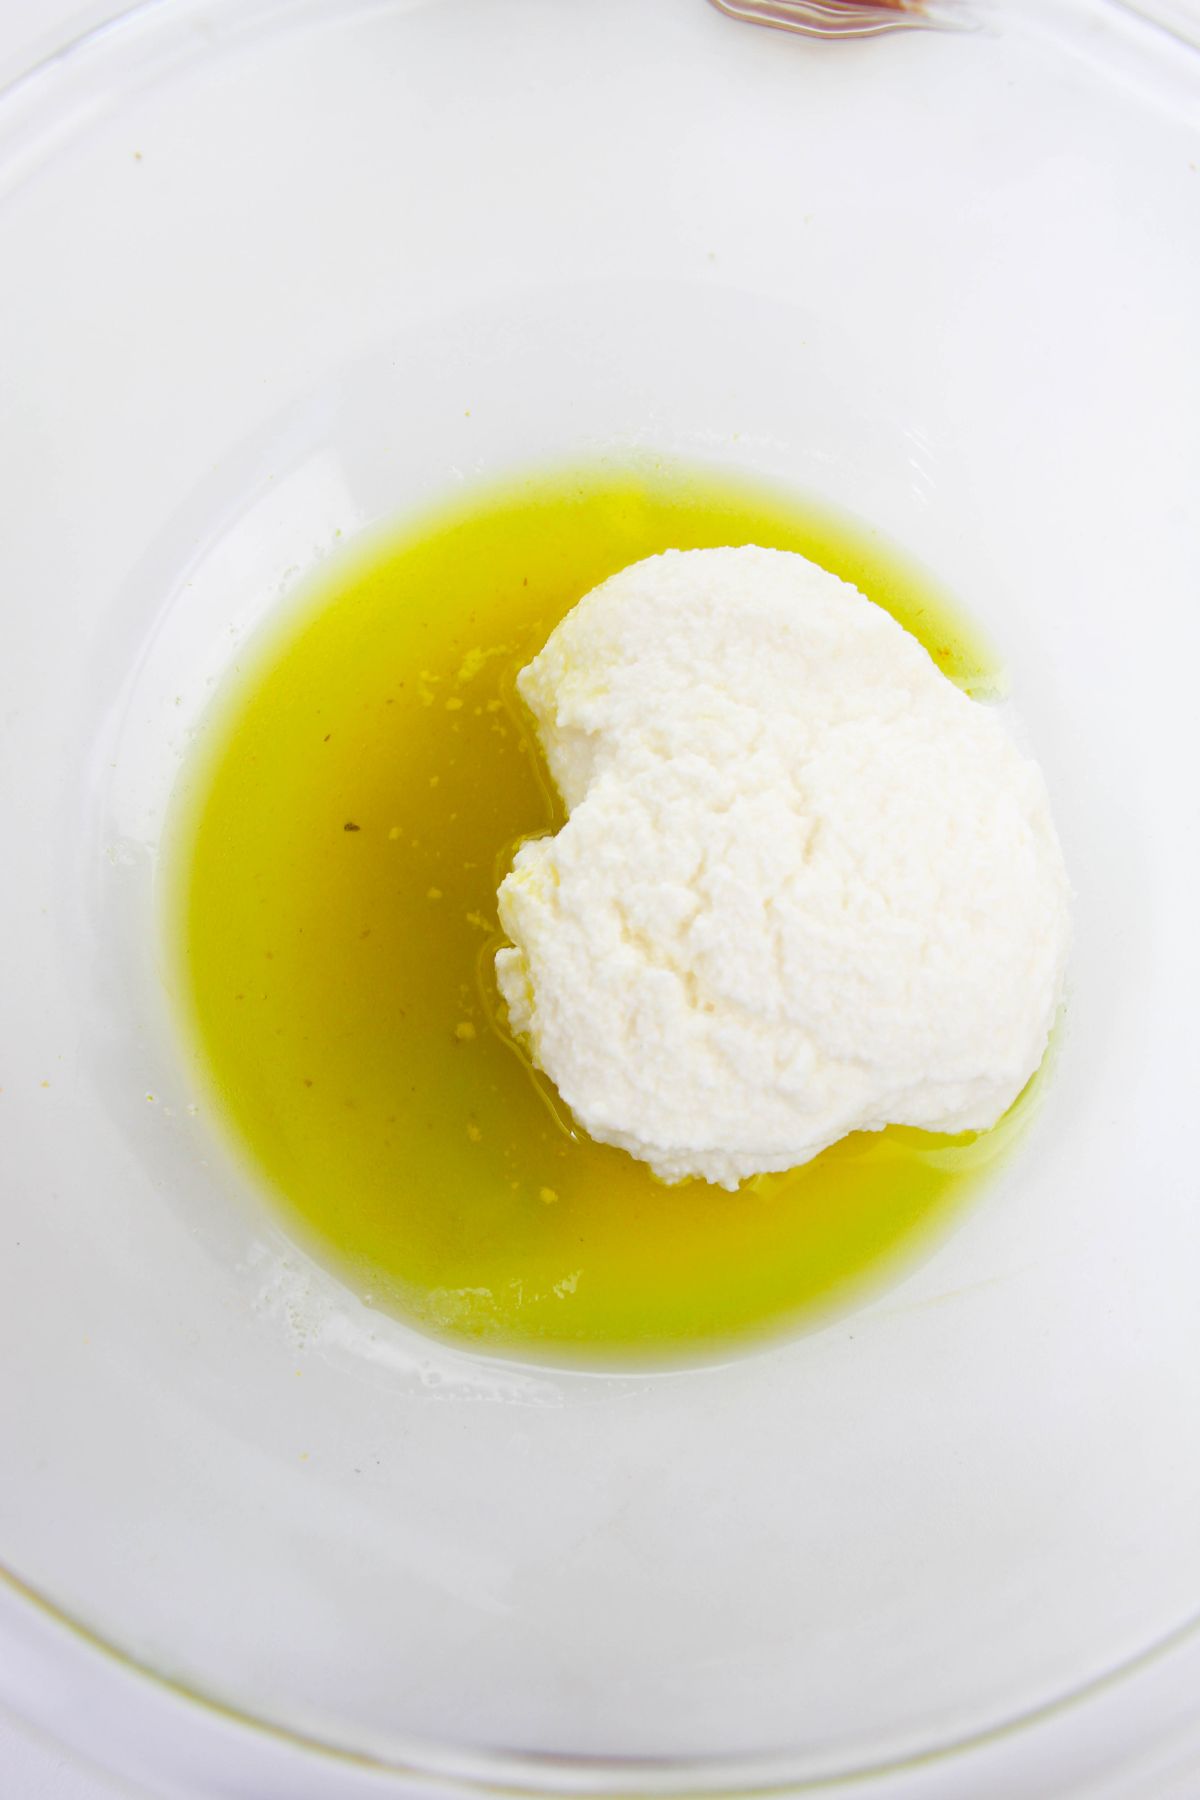 Oil and ricotta cheese in a small glass bowl